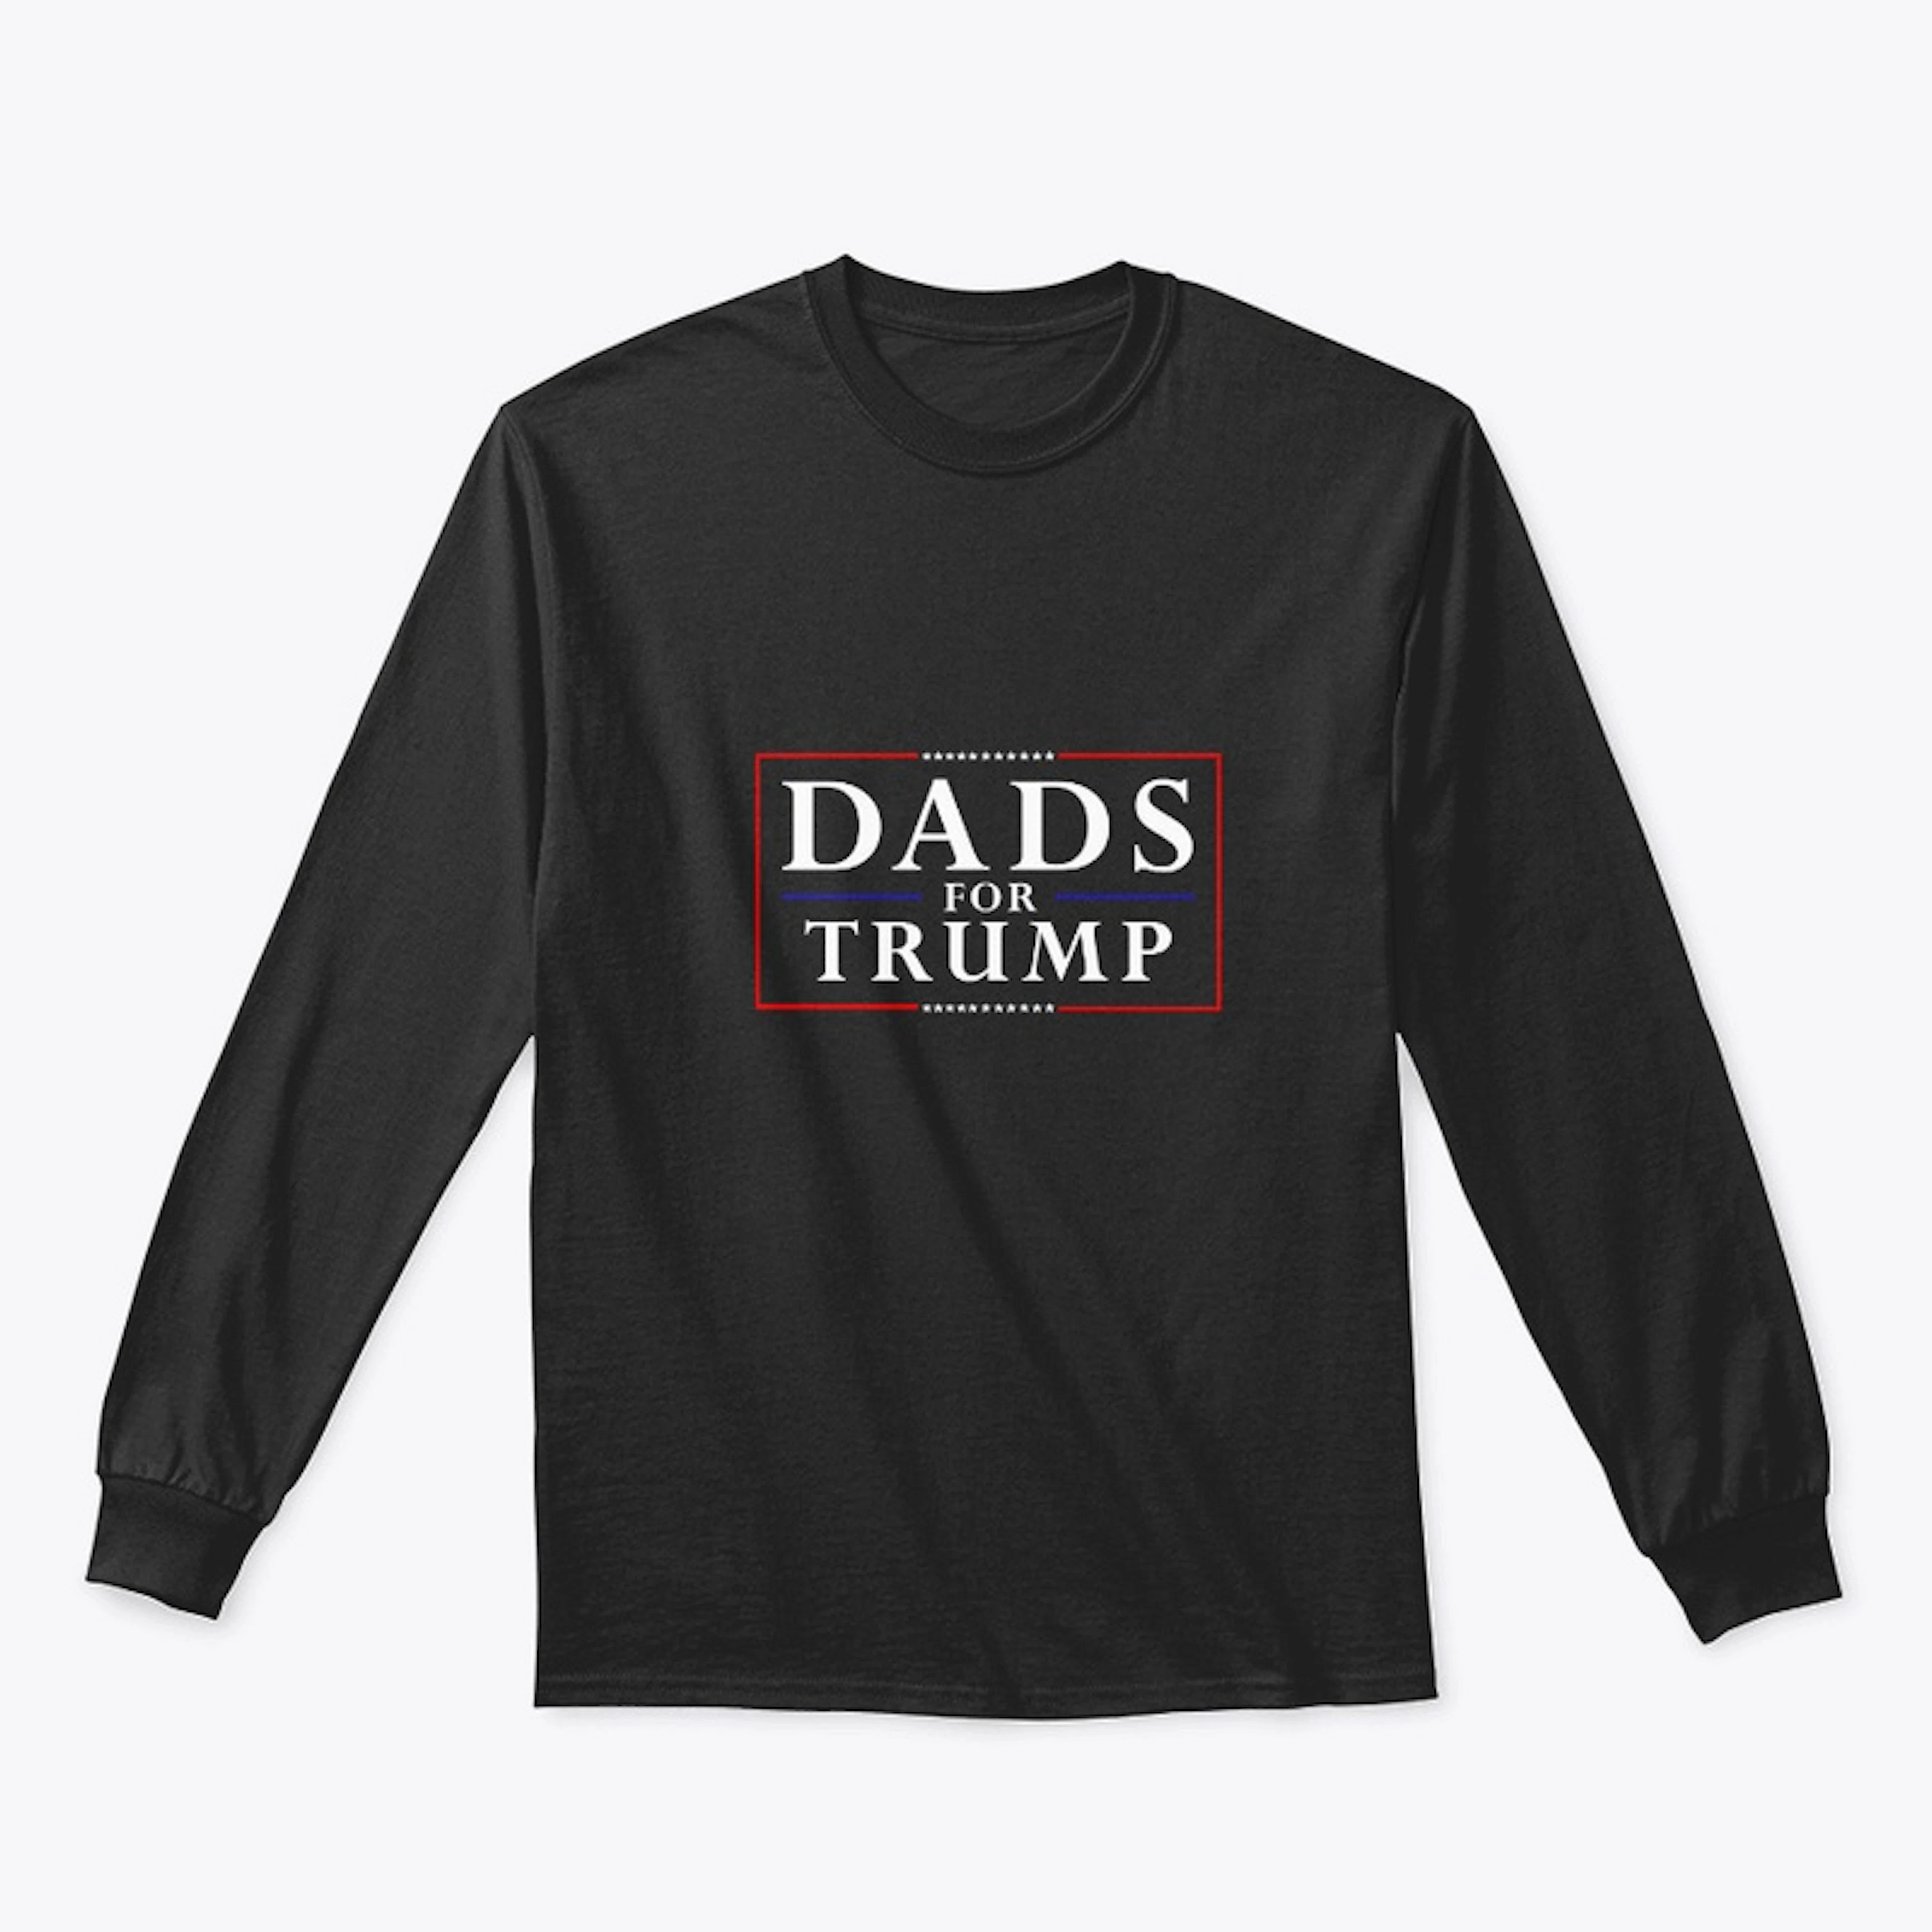 Dad's For Trump